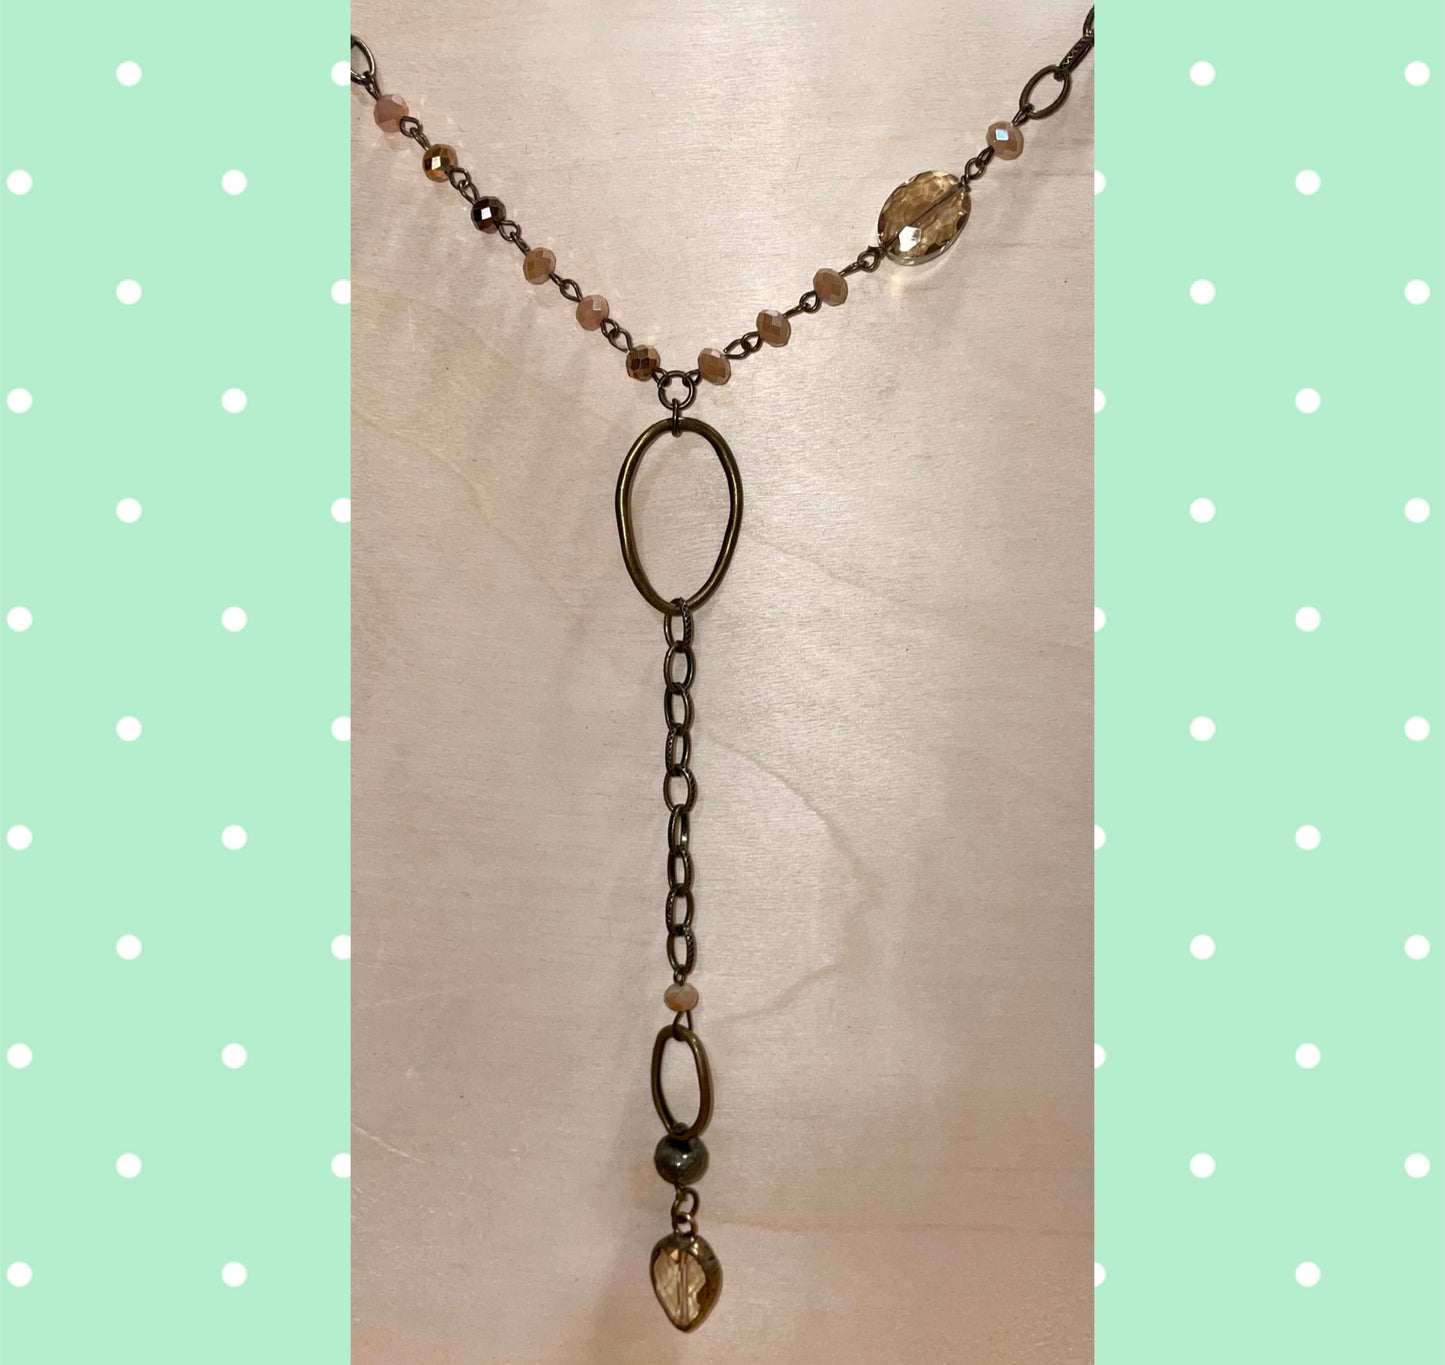 Long Lariat Vintage Style Necklace with Faceted Glass & Antiqued Brass Chain